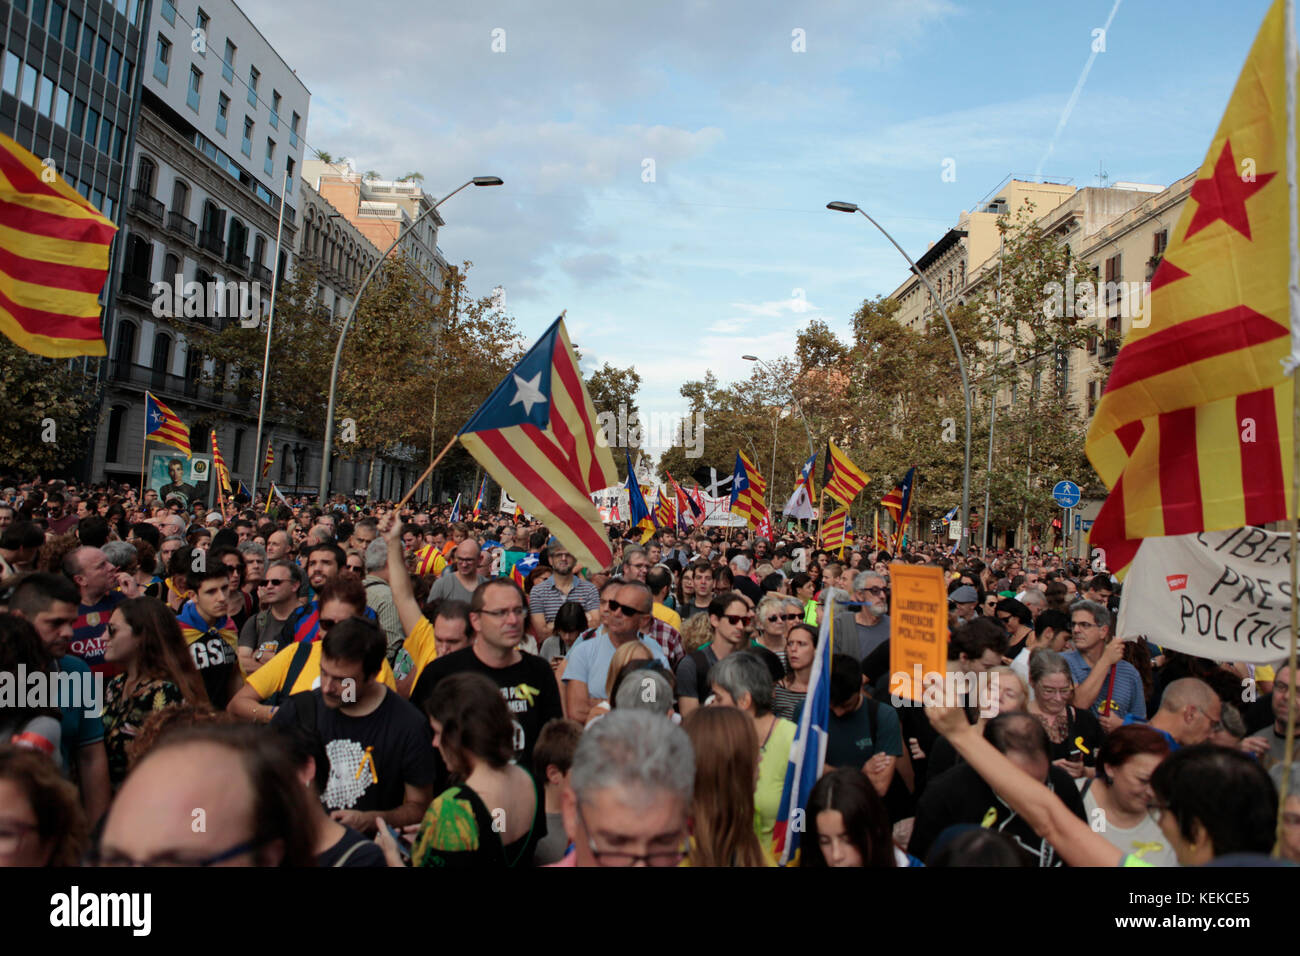 Barcelona, Spain. 21st October, 2017.    Free jordi demo IN central barcelona, 21/10/2017. Hundreds of Thousands of Catalans gather in a demonstration to show support for the two JORDI'S who have been detained in madrid for anti-constitutional behaviour. the Demonstration happened hours after the Spanish pime minister, Mariano Rajoy gave a detailed press briefing declaring the article 155 in catalonia.  Photo credit: RICH BOWEN Credit: rich bowen/Alamy Live News Stock Photo